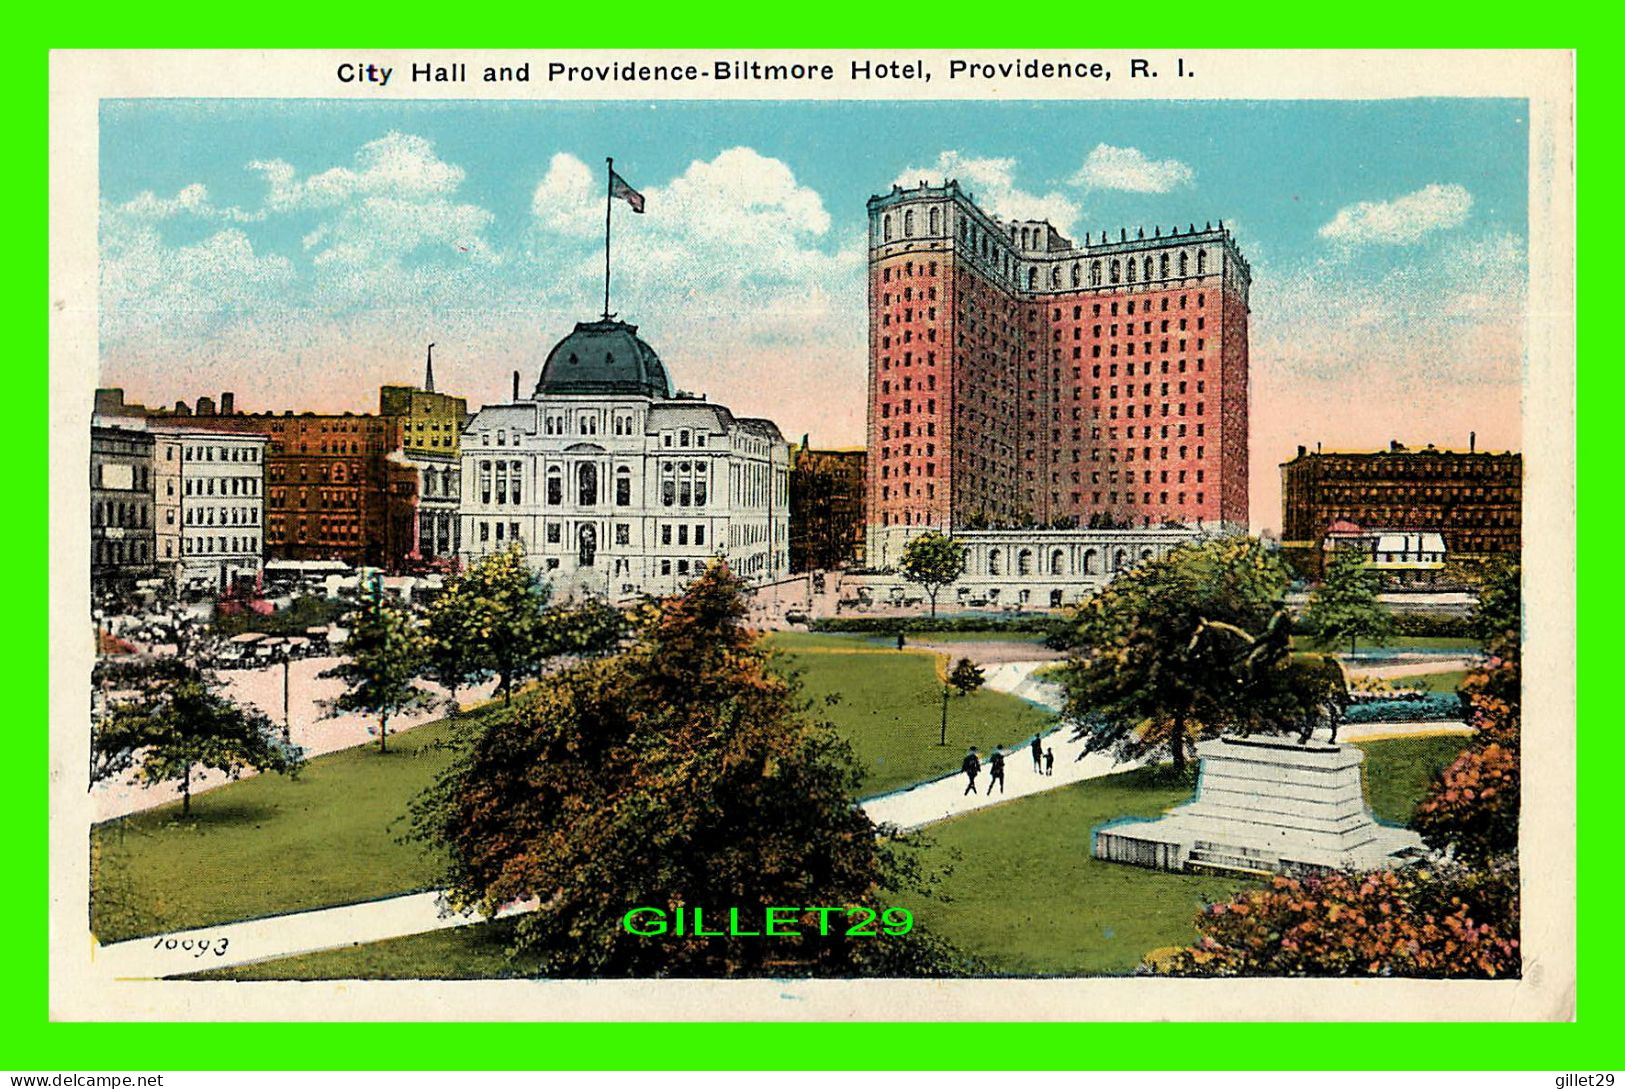 PROVIDENCE, RI - CITY HALL AND PROVIDENCE-BILTMORE HOTEL - PUBLISHED BY THE UNION NEWS CO - - Providence